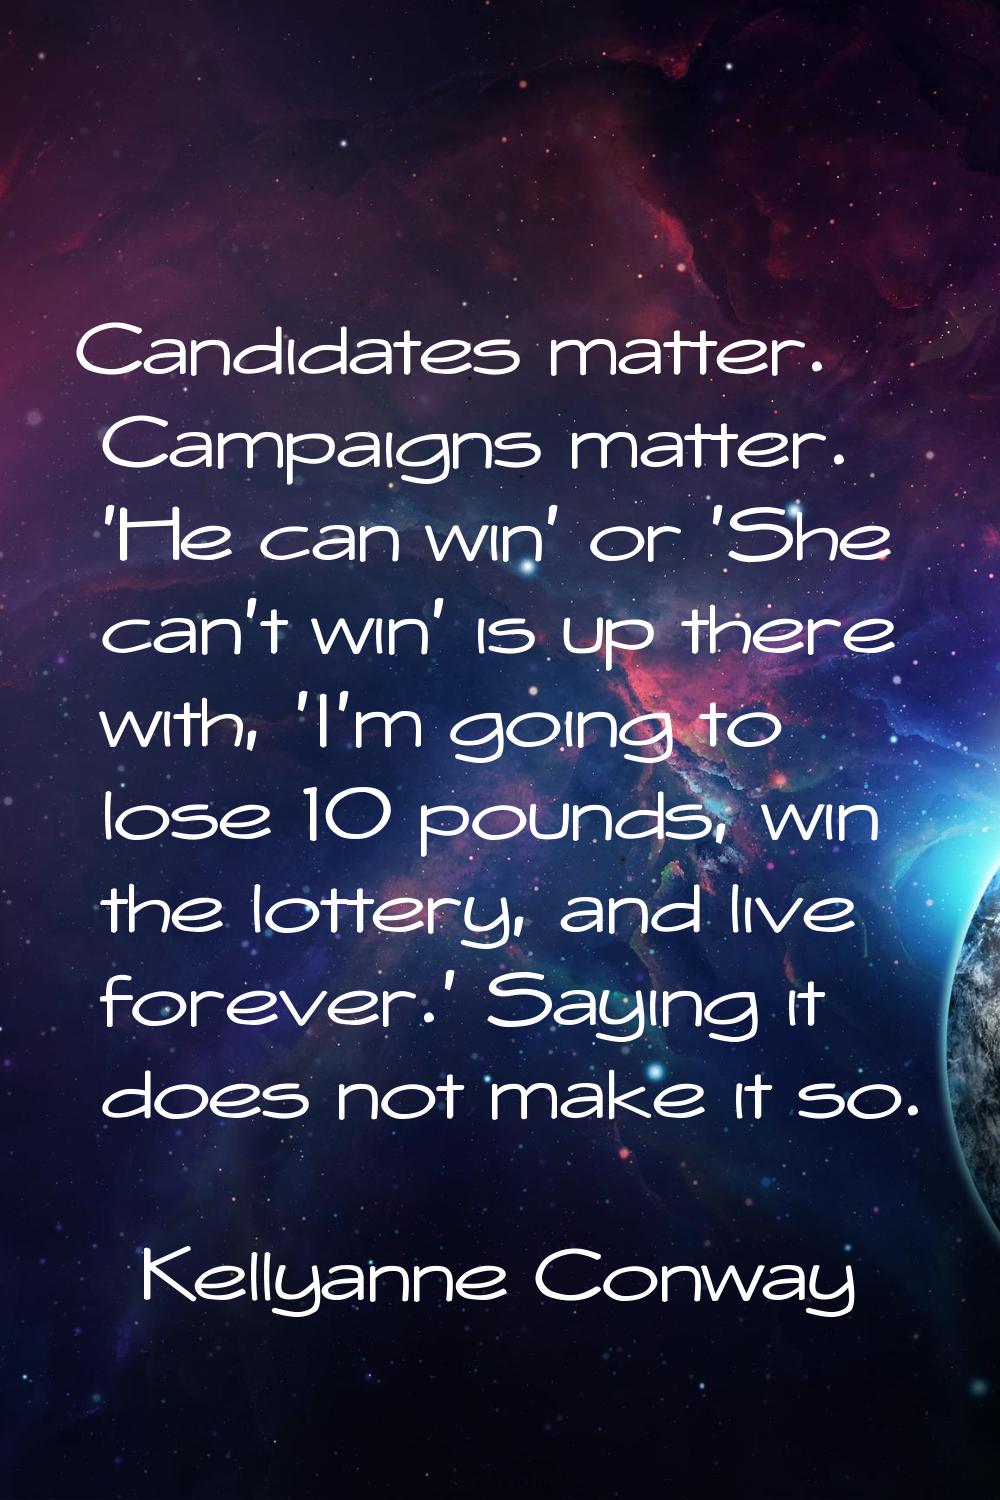 Candidates matter. Campaigns matter. 'He can win' or 'She can't win' is up there with, 'I'm going t